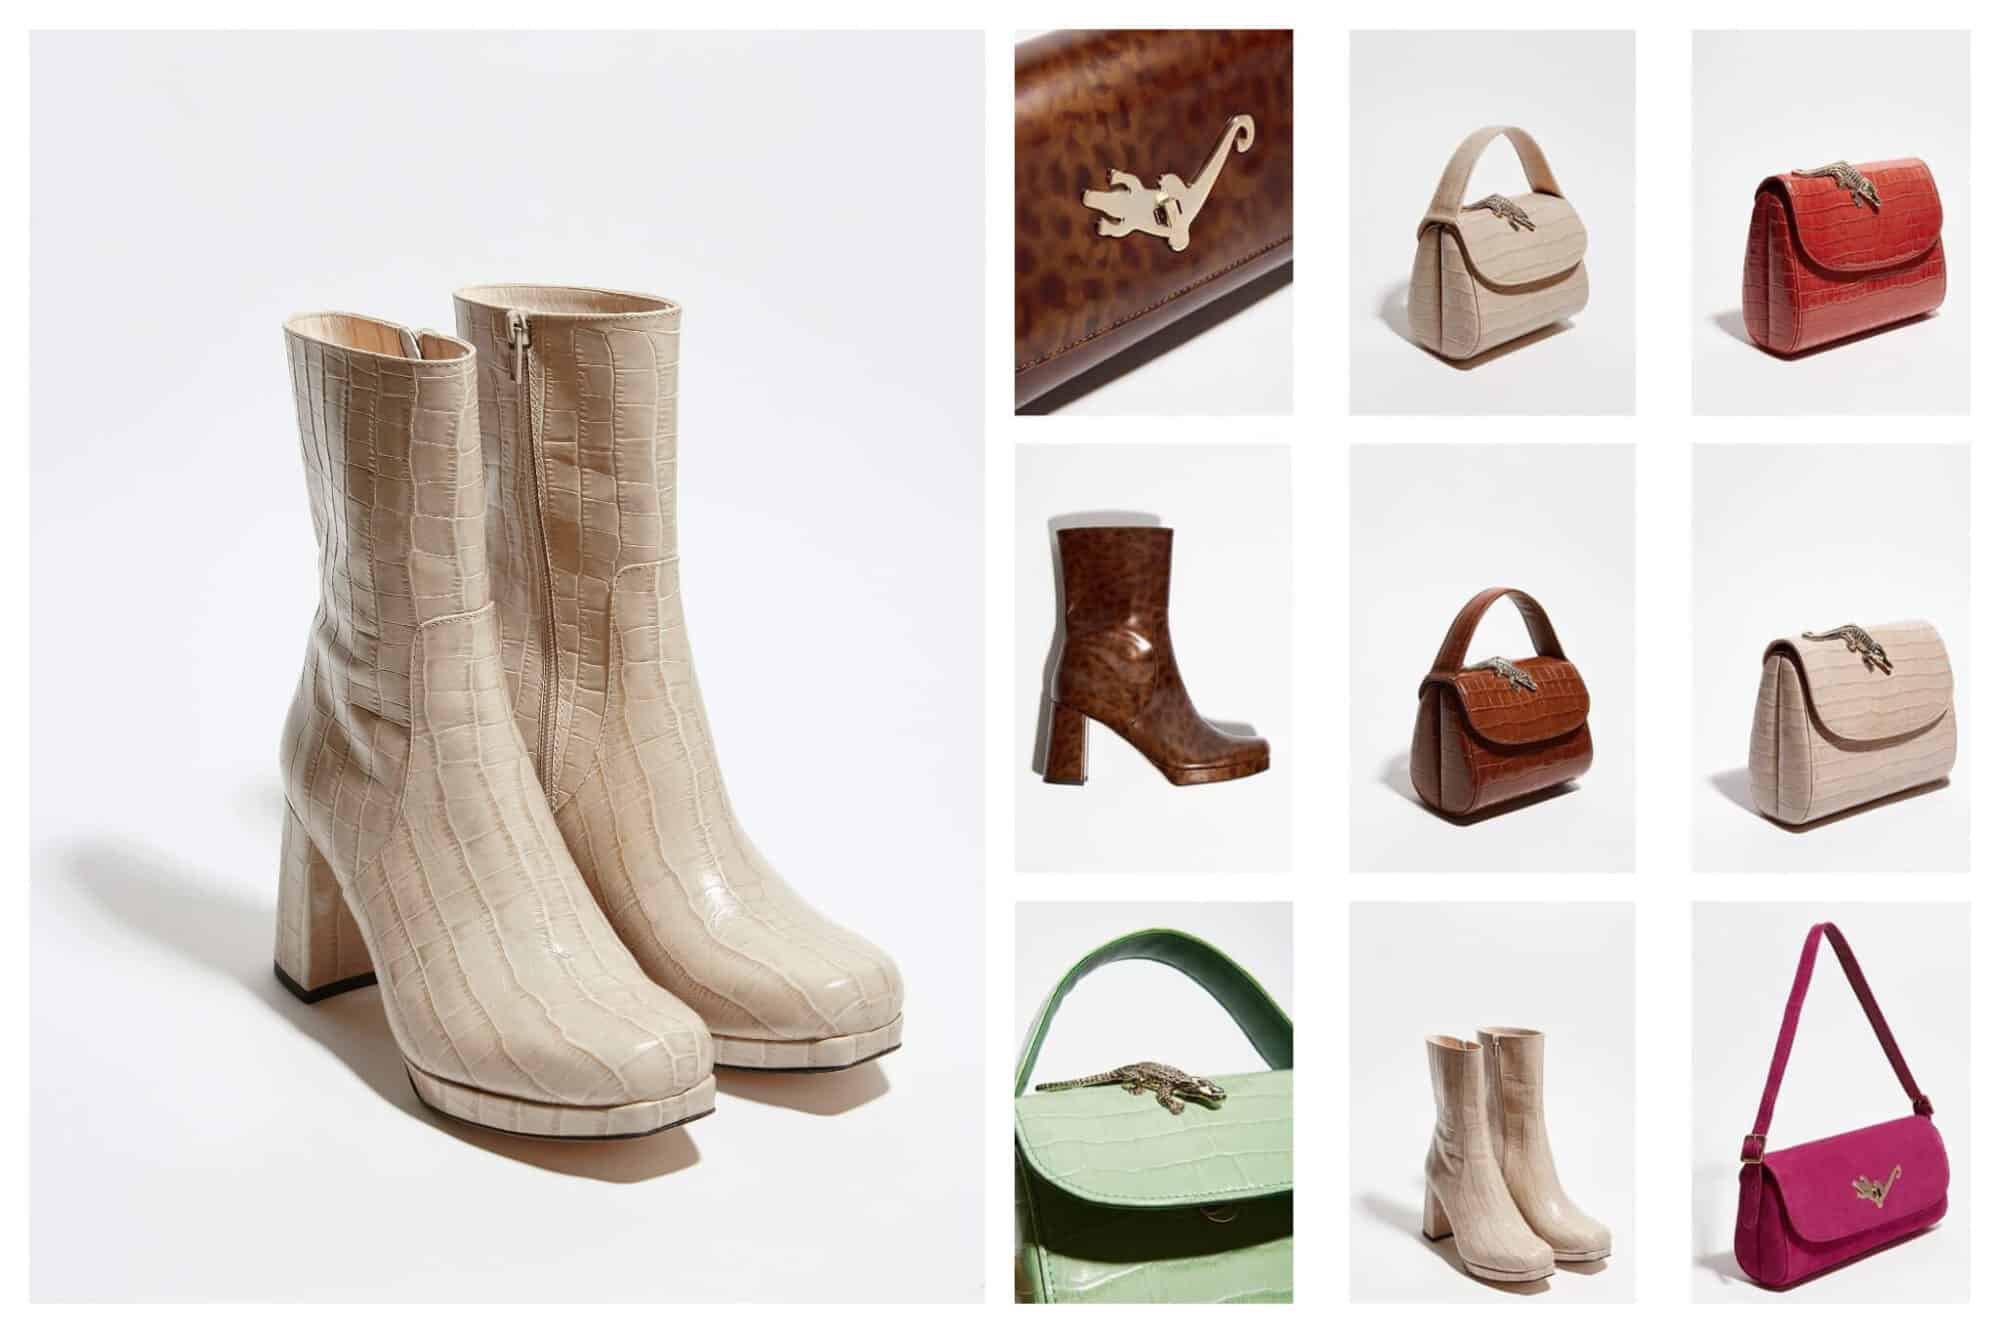 Left: a pair of beige boots. 
Right: Assorted accessories including small purses and boots.